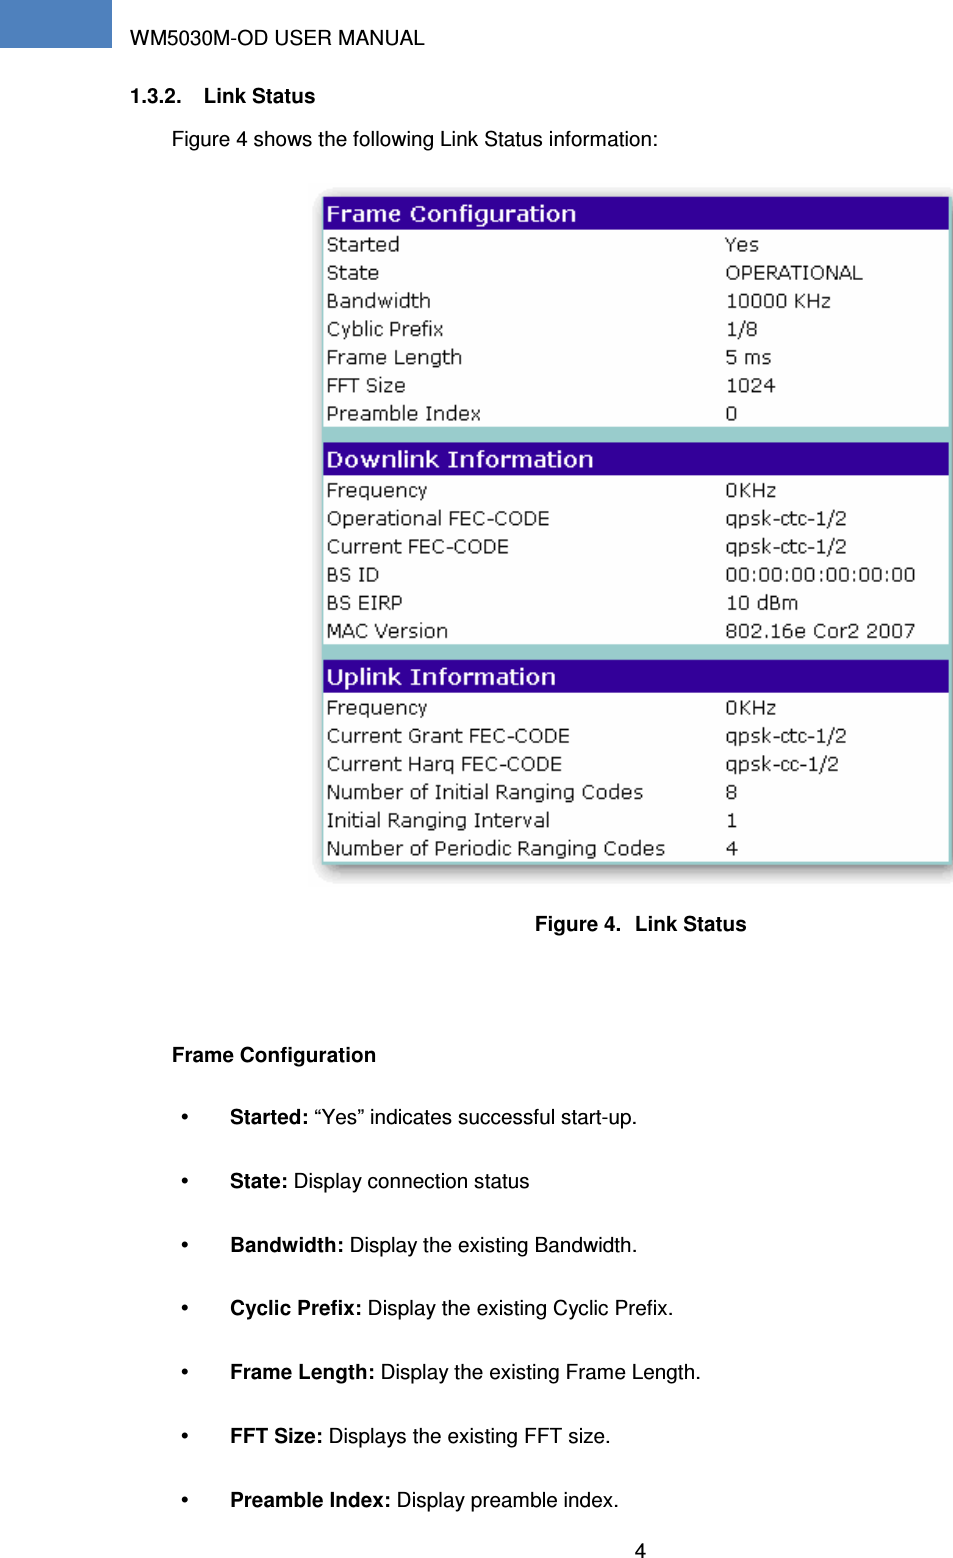 WM5030M-OD USER MANUAL 4    1.3.2.  Link Status Figure 4 shows the following Link Status information:  Figure 4.  Link Status  Frame Configuration  Started: “Yes” indicates successful start-up.  State: Display connection status  Bandwidth: Display the existing Bandwidth.  Cyclic Prefix: Display the existing Cyclic Prefix.  Frame Length: Display the existing Frame Length.  FFT Size: Displays the existing FFT size.  Preamble Index: Display preamble index. 